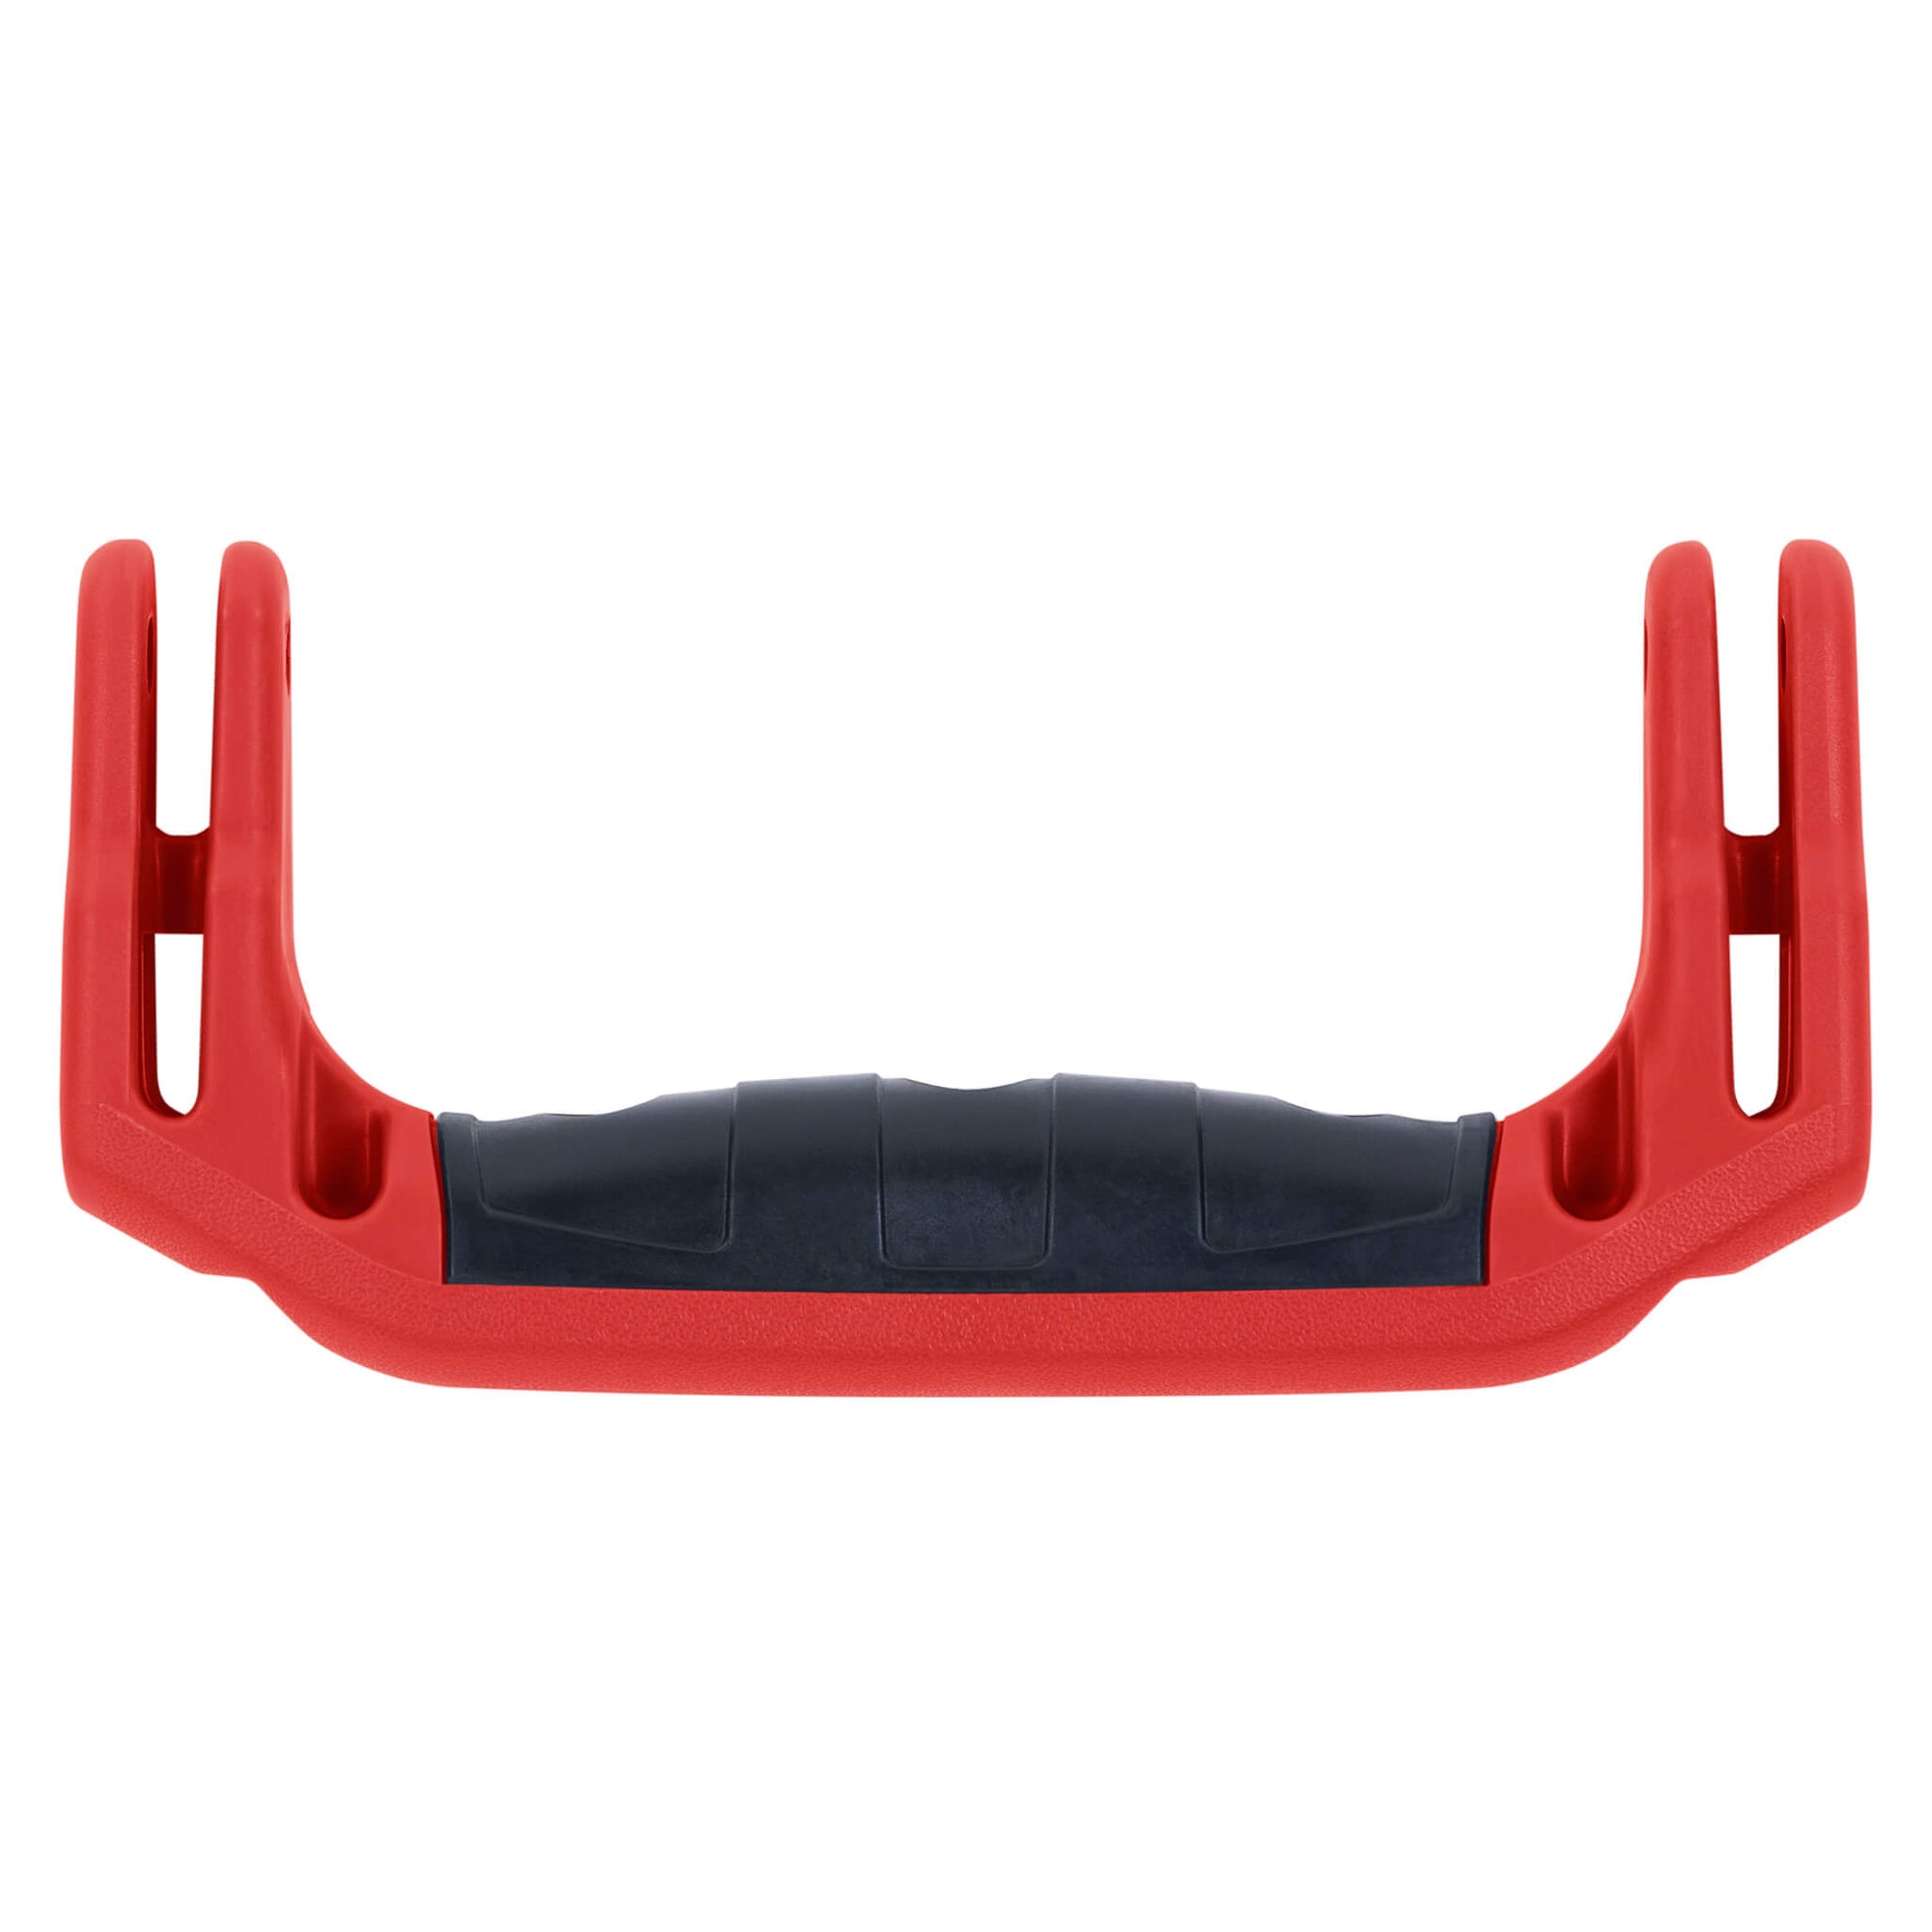 Pelican Rubber Overmolded Replacement Handle, Small, Red (2-Prong) ColorCase 